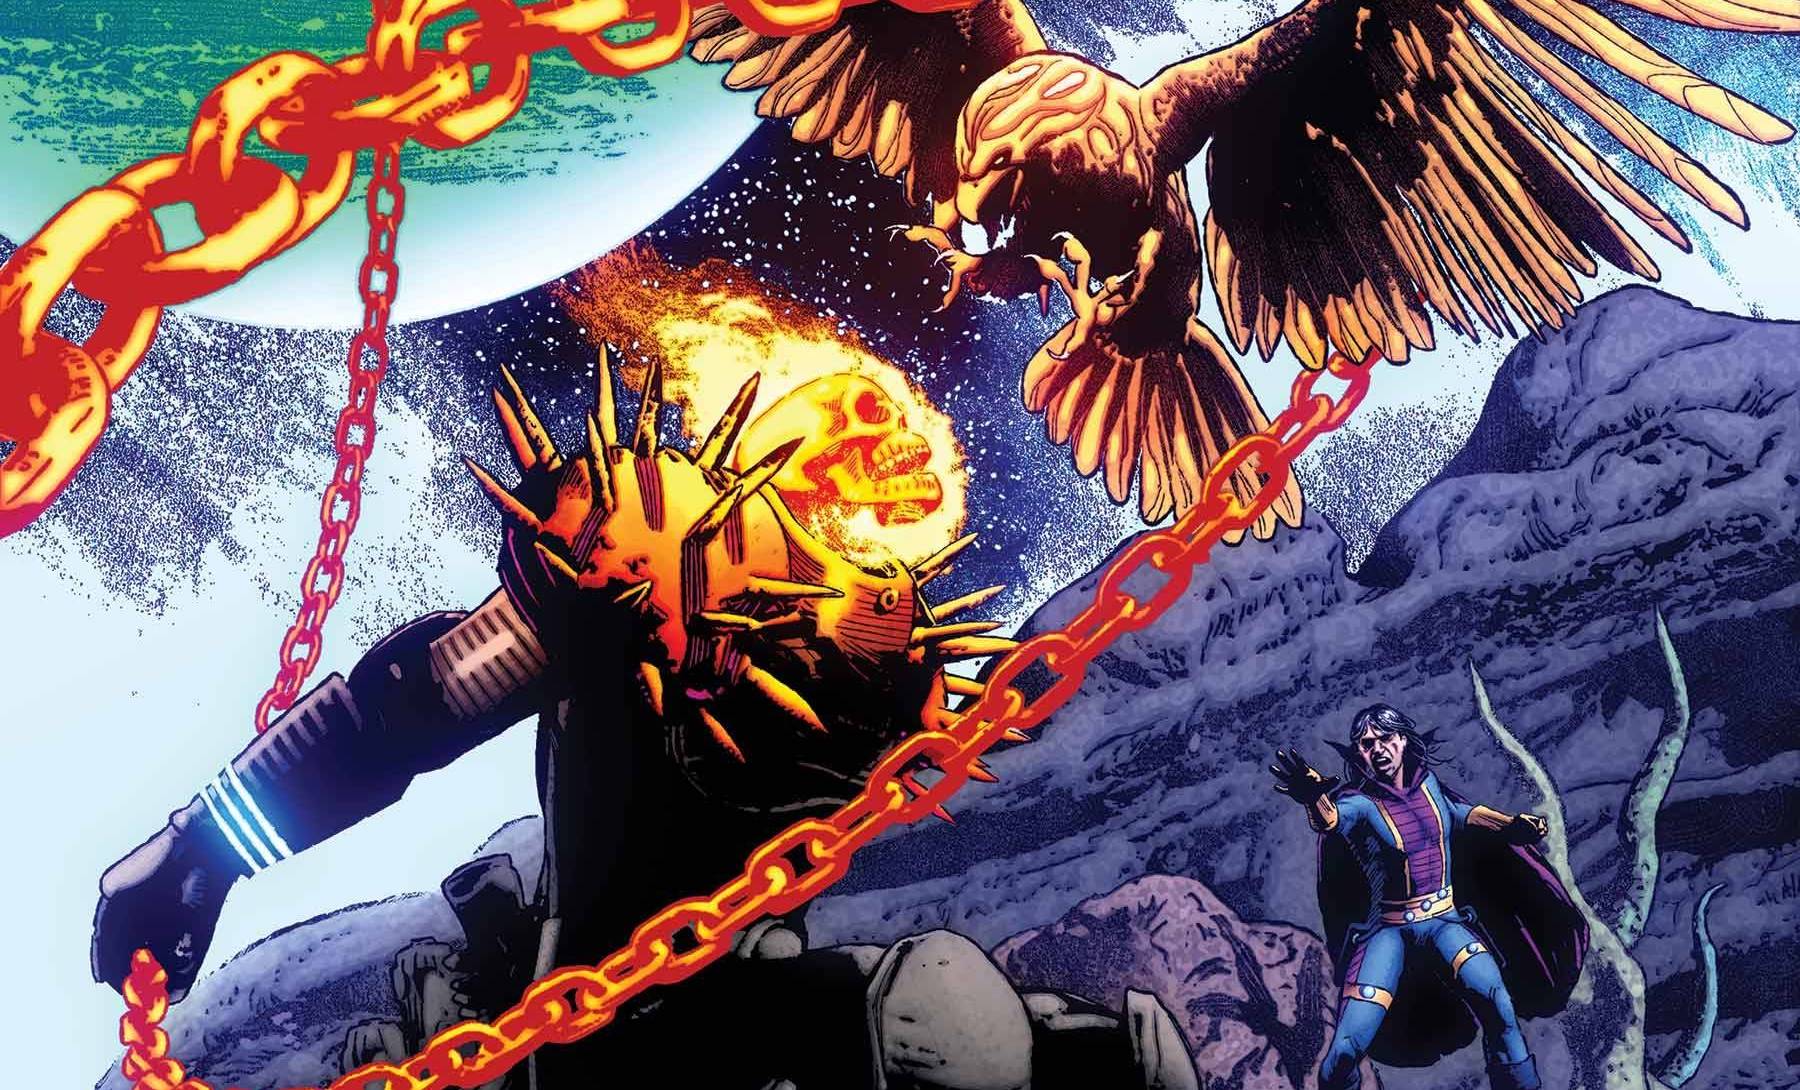 In ‘Cosmic Ghost Rider’ #2, Frank Castle might have lost his mojo